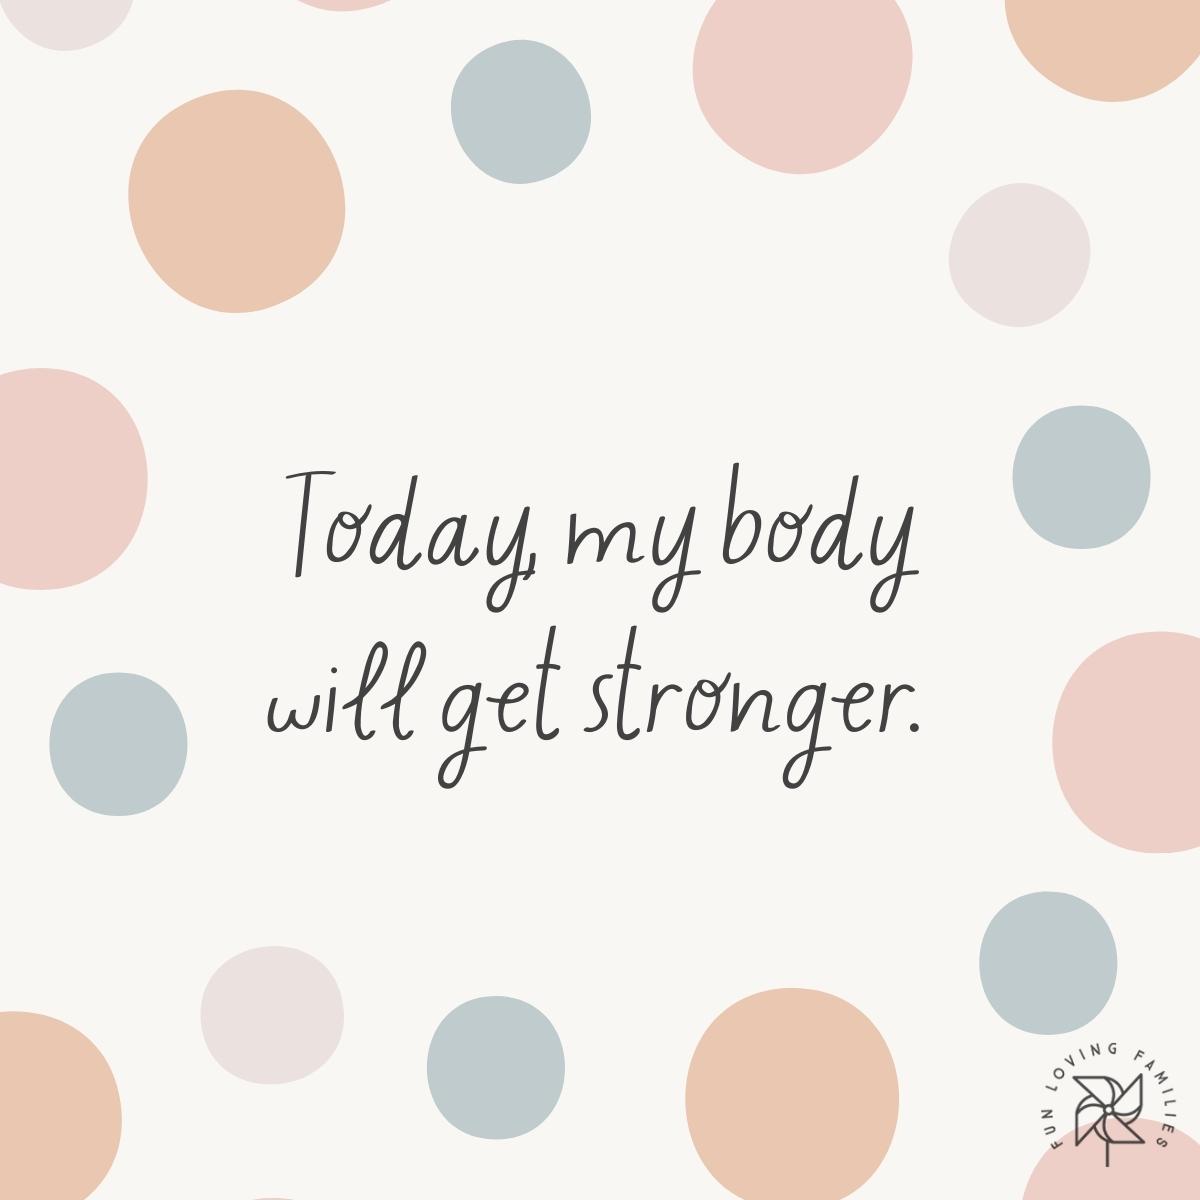 Today, my body will get stronger affirmation